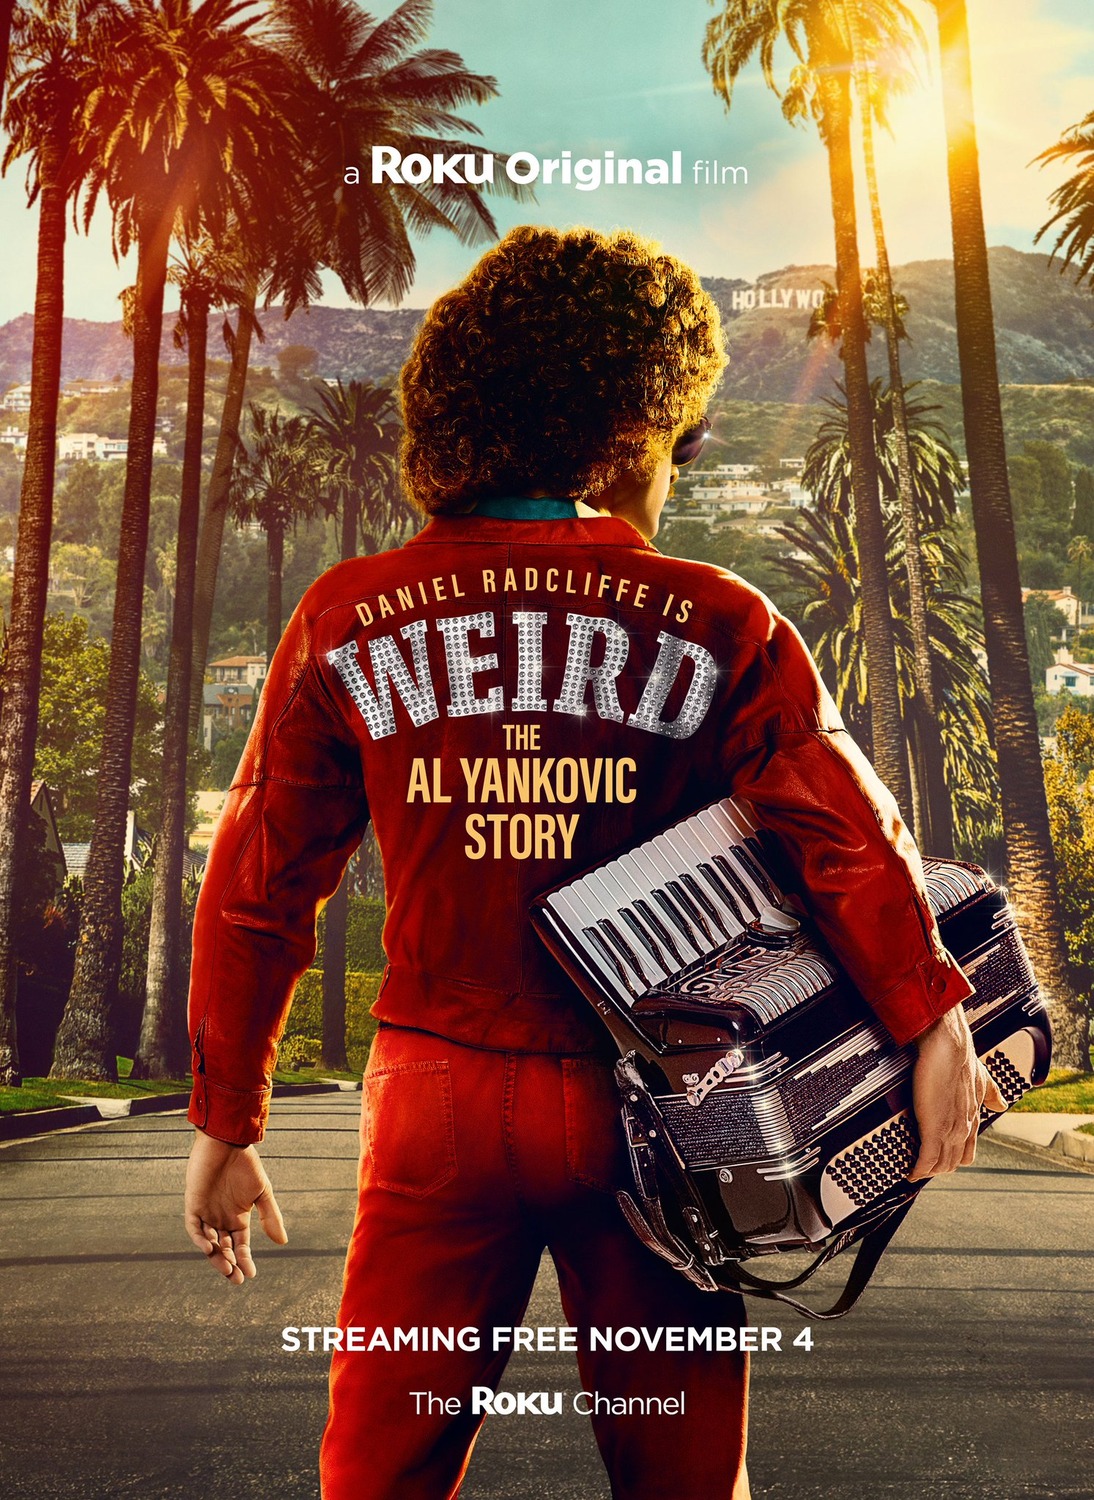 weird_the_al_yankovic_story_xlg